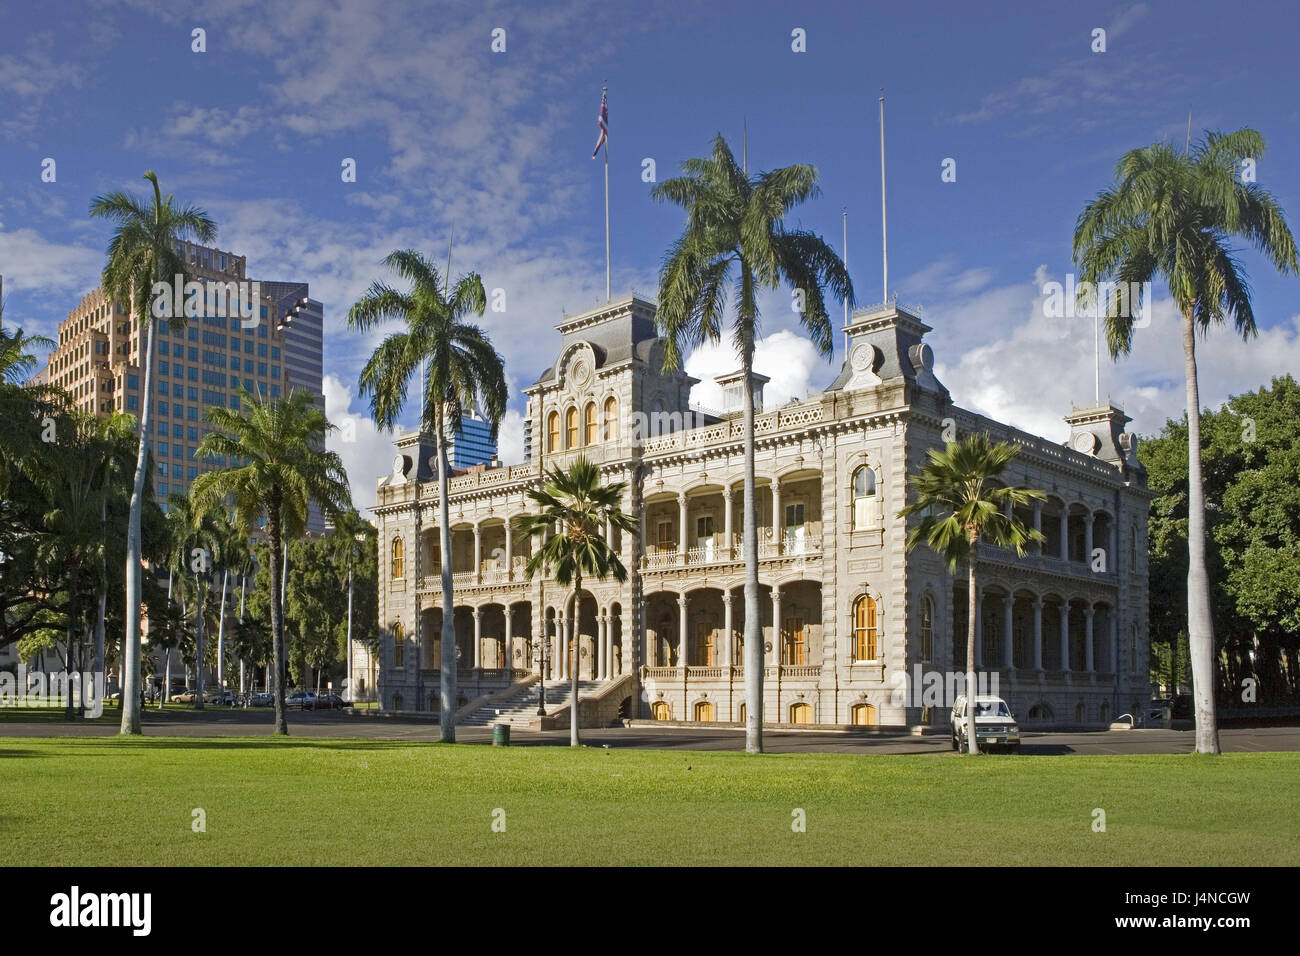 The USA, Hawaii, Oahu Iceland, Honolulu, Capitol, palms, the Hawaiian Islands, town, destination, place of interest, culture, Capitol, parliament, government, building, architecture, turf, Stock Photo